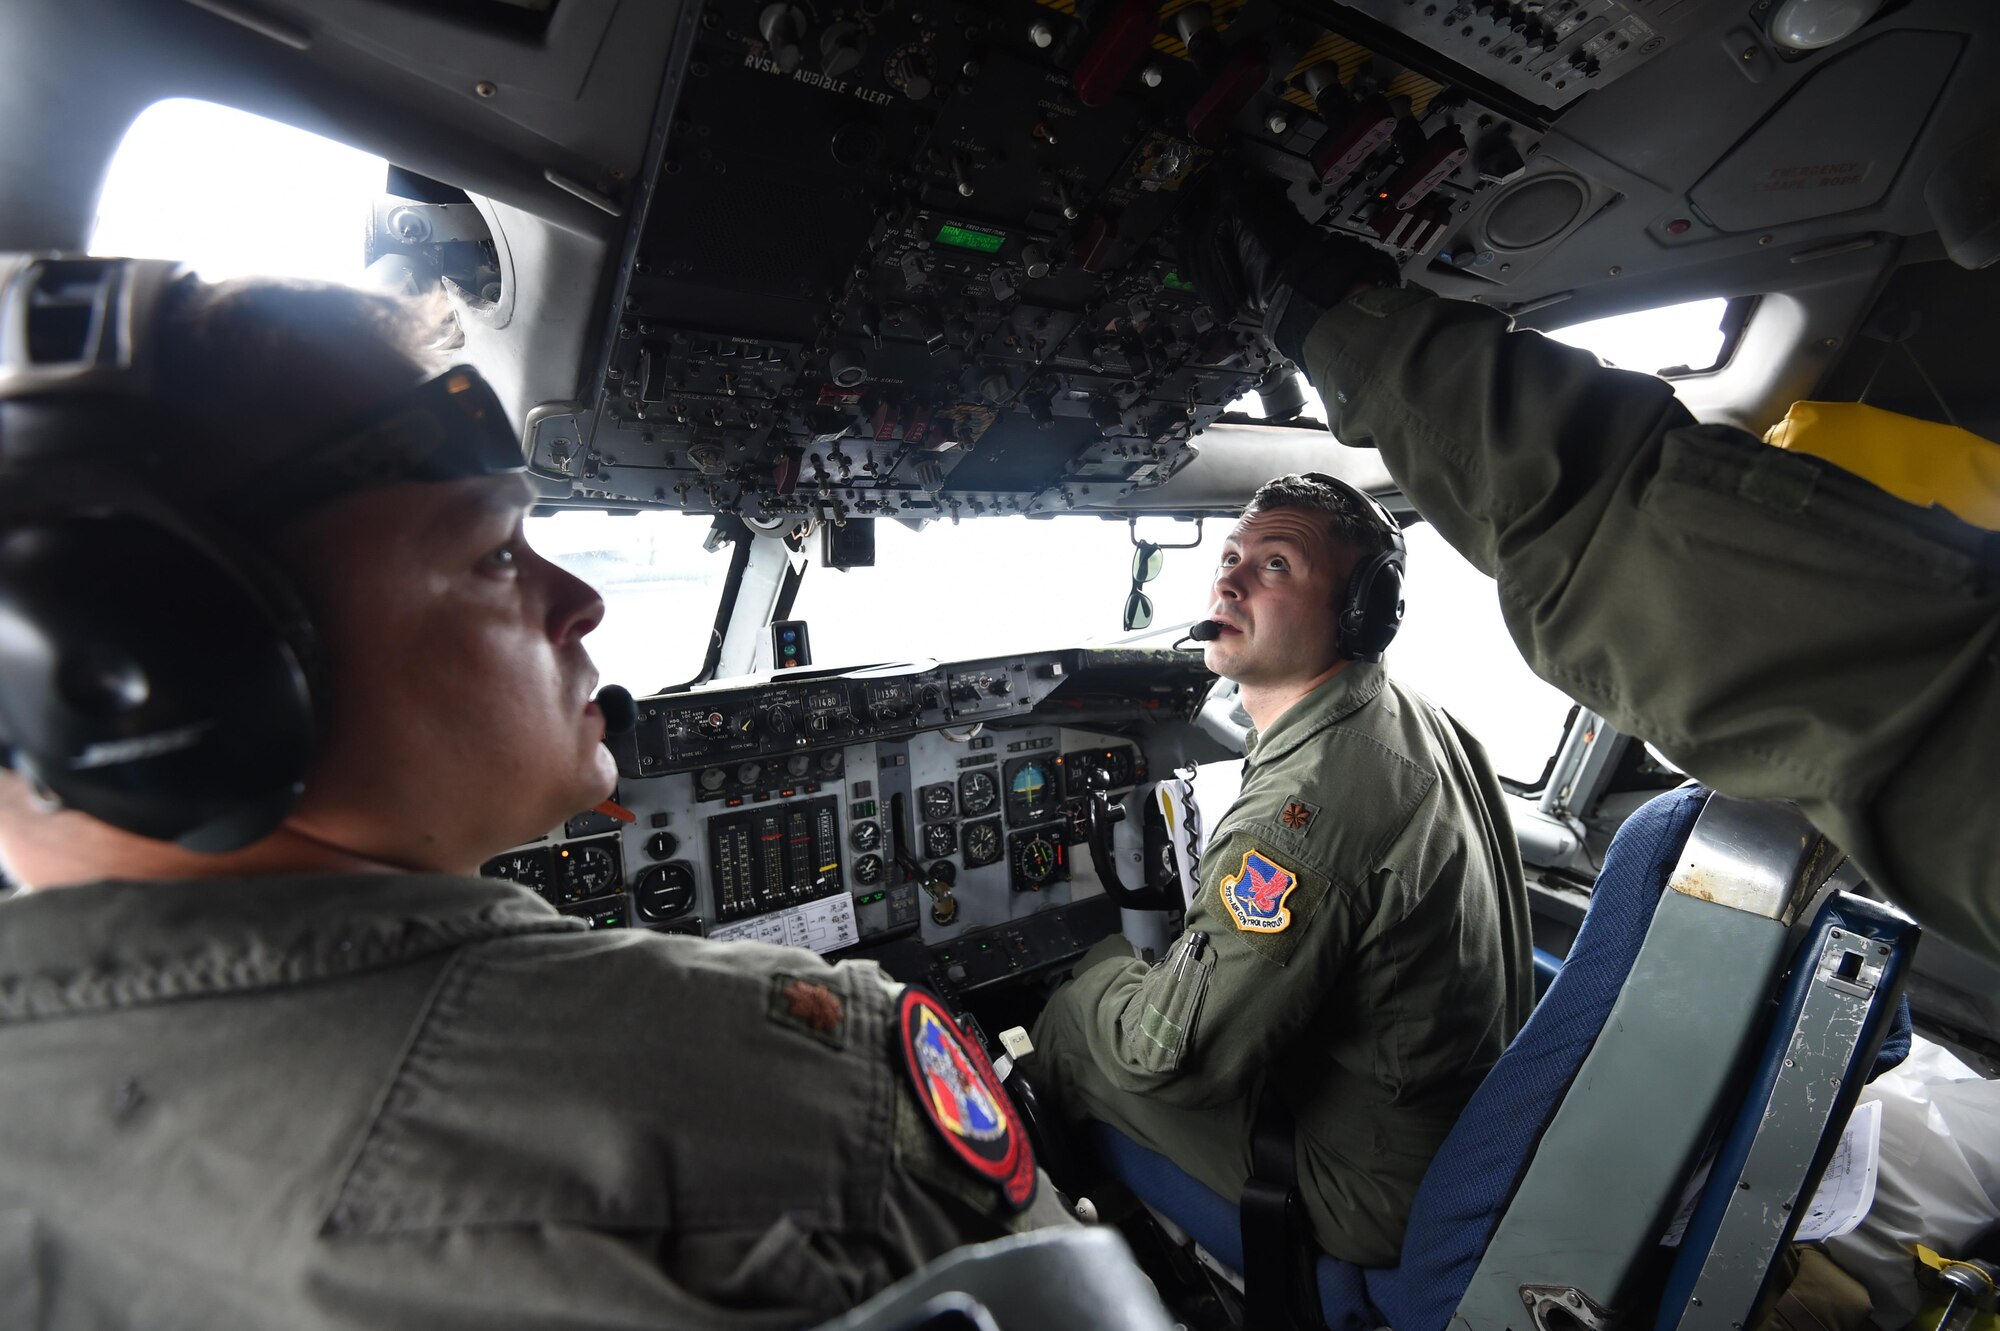 Maj. Matt Portno, right, and Maj. Shawn Kilbourne, left, complete pre-flight checklists aboard an E-3 Sentry July 23, 2016, at Joint Base Pearl Harbor-Hickam, Hawaii, in support of Rim of the Pacific 2016. More than 125 Airmen from the 513th Air Control Group and 552nd Air Control Wing are deployed to Hawaii in support of the RIMPAC 2016 exercise. Twenty-six nations, more than 40 ships and submarines, more than 200 aircraft and 25,000 personnel are participating in RIMPAC from June 30 to Aug. 4, in and around the Hawaiian Islands and Southern California. The world's largest international maritime exercise, RIMPAC provides a unique training opportunity that helps participants foster and sustain the cooperative relationships that are critical to ensuring the safety of sea lanes and security on the world's oceans. RIMPAC 2016 is the 25th exercise in the series that began in 1971. (U.S. Air Force photo by 2nd Lt. Caleb Wanzer)